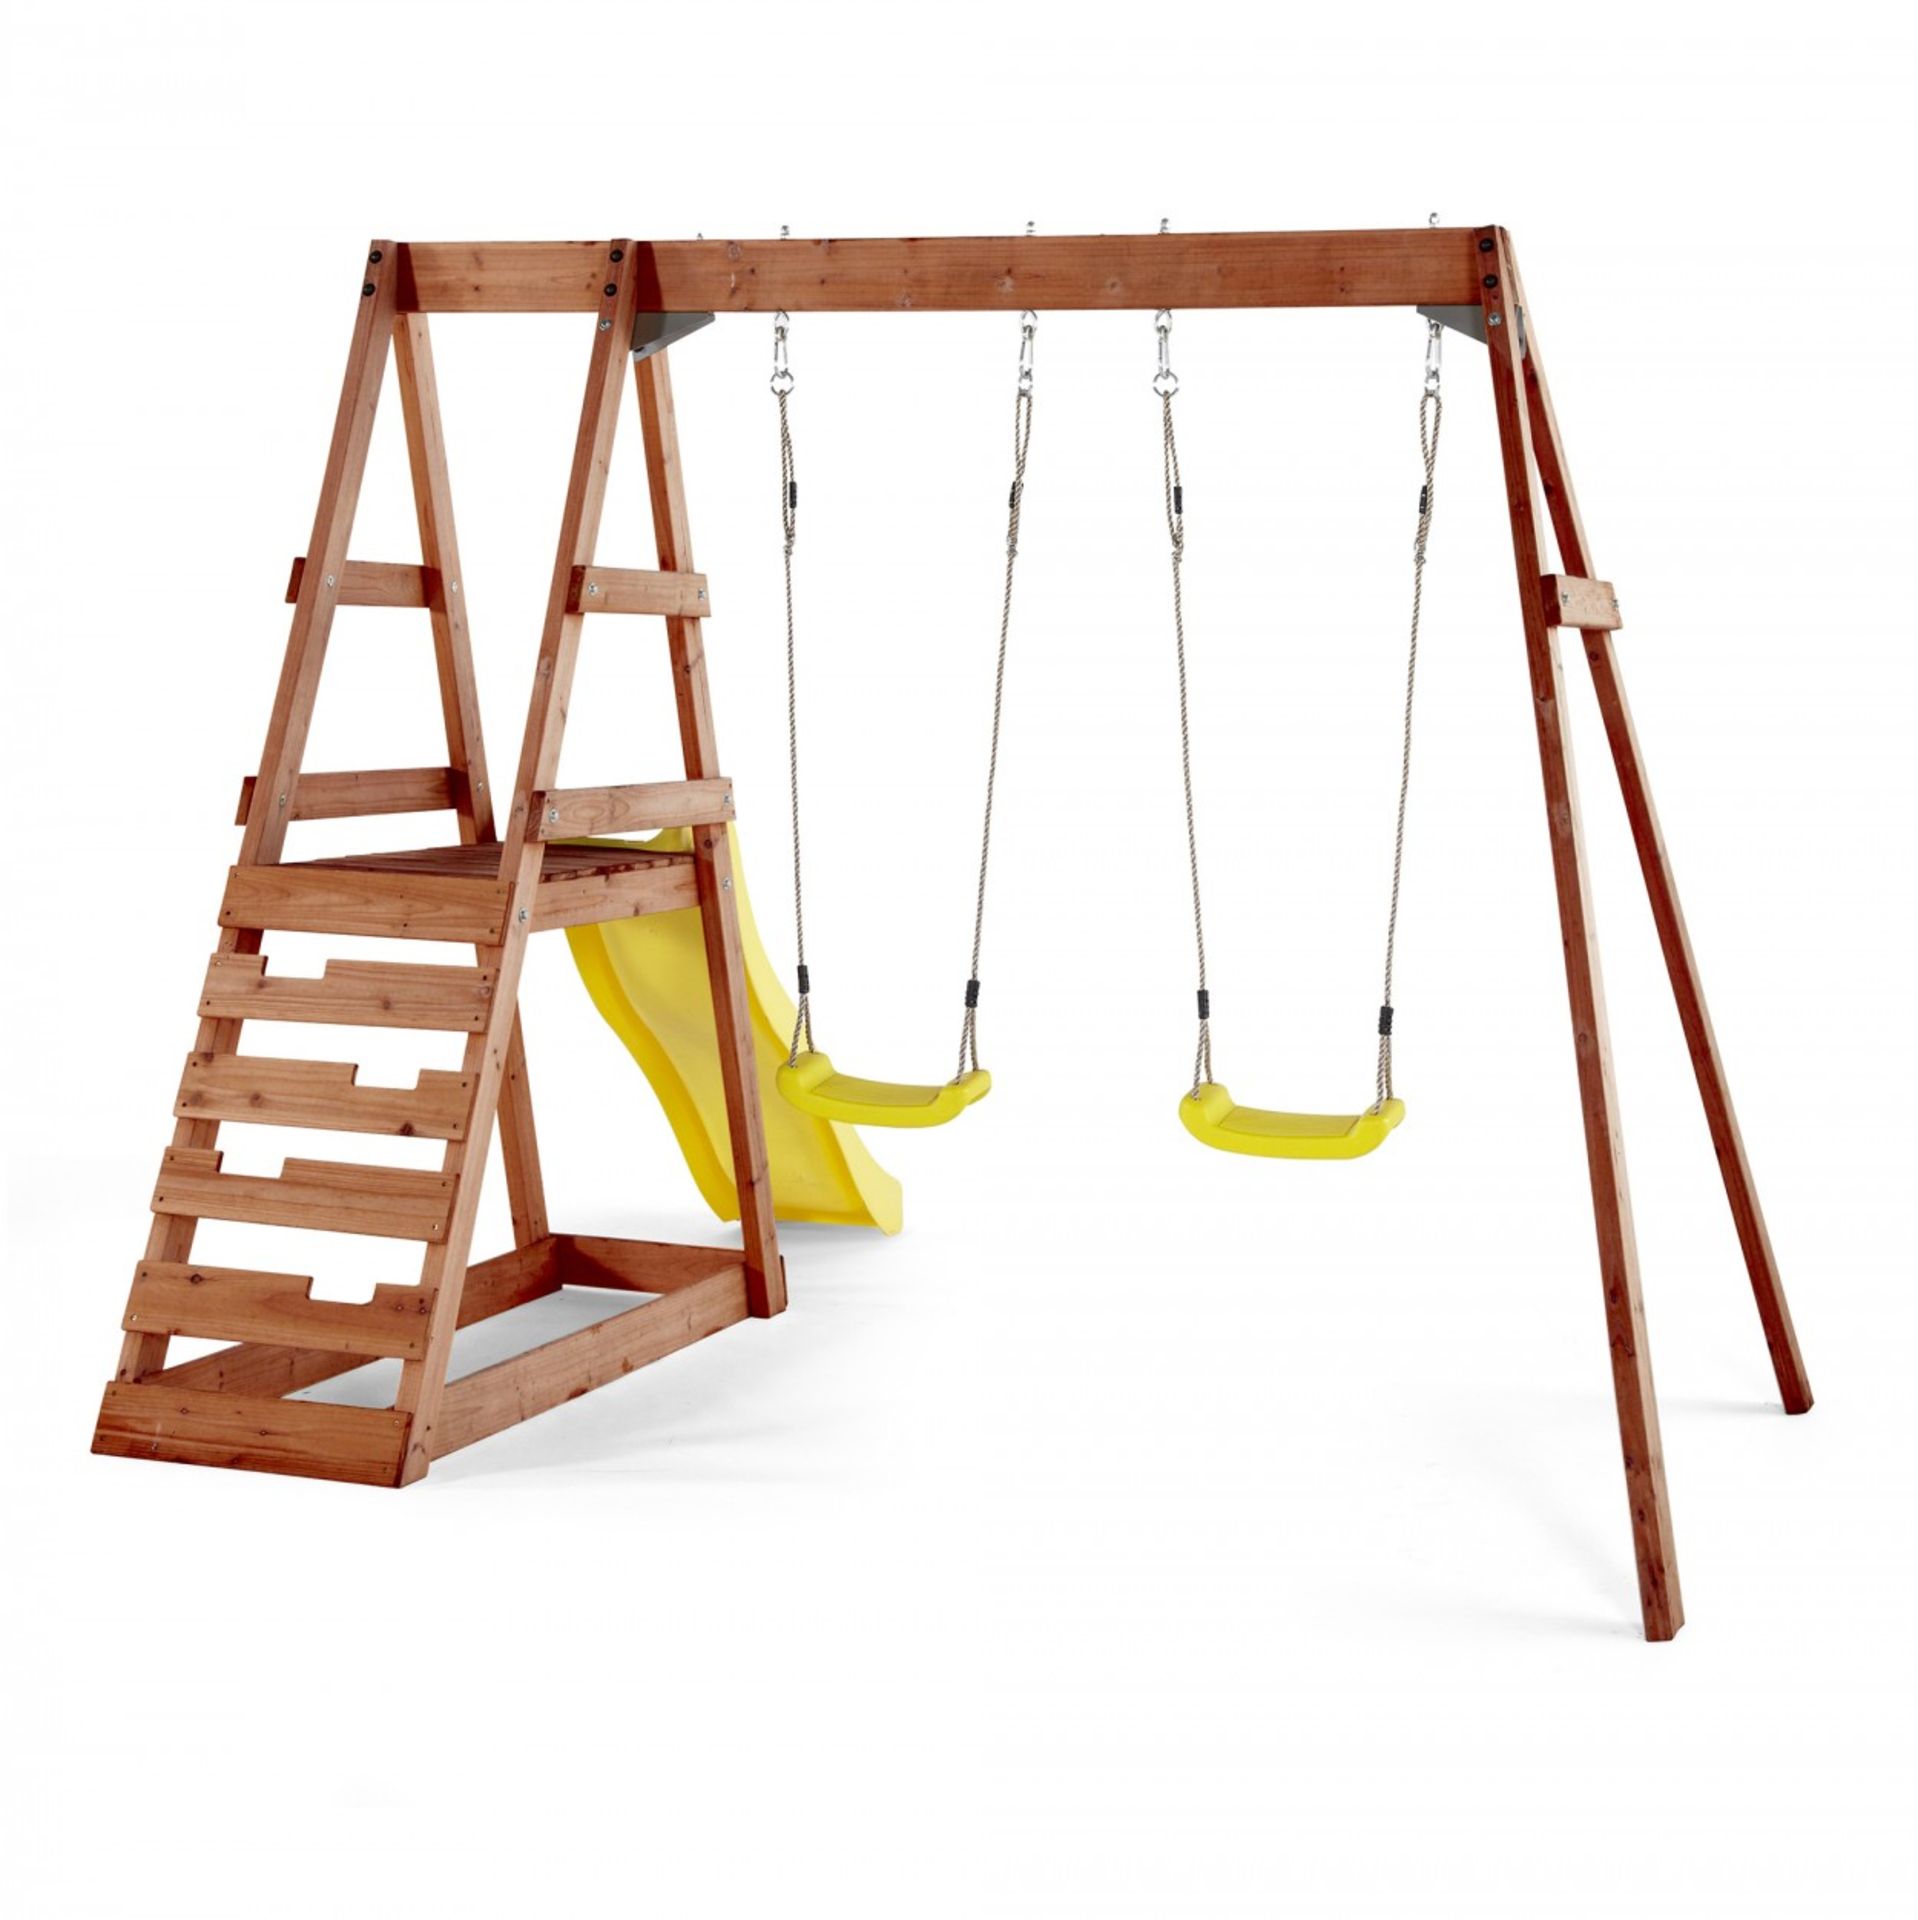 1 x Plum Products Tamarin Wooden Outdoor Play Centre. BRAND NEW. RRP £399.99 each! The Tamarin - Image 4 of 5